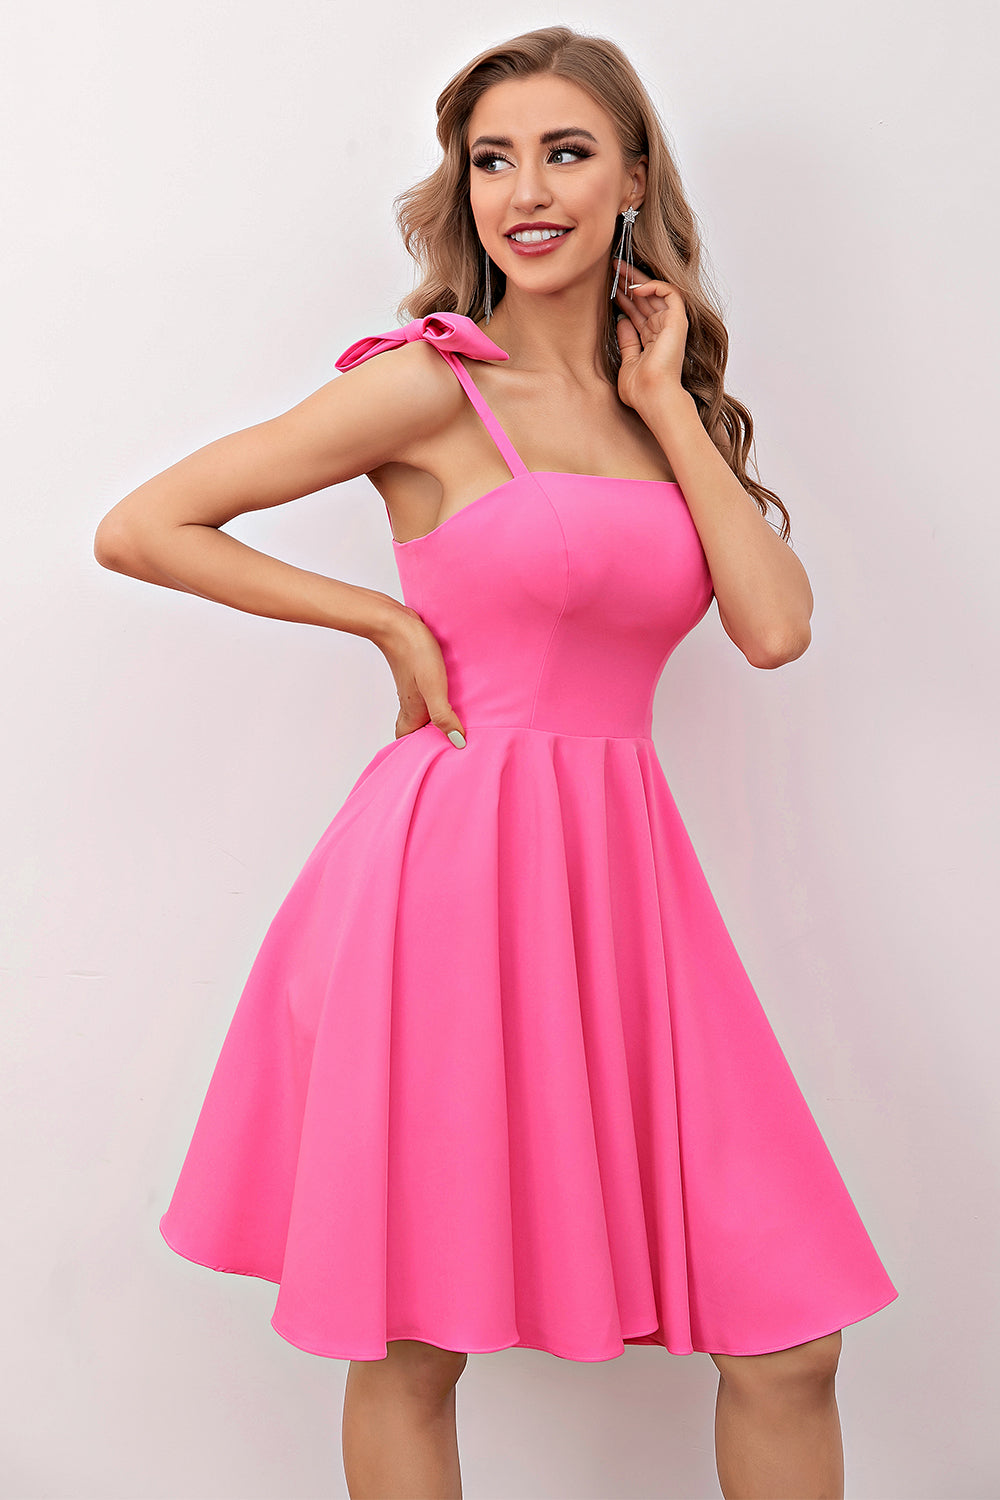 Pink Short Cocktail Dress with Bow